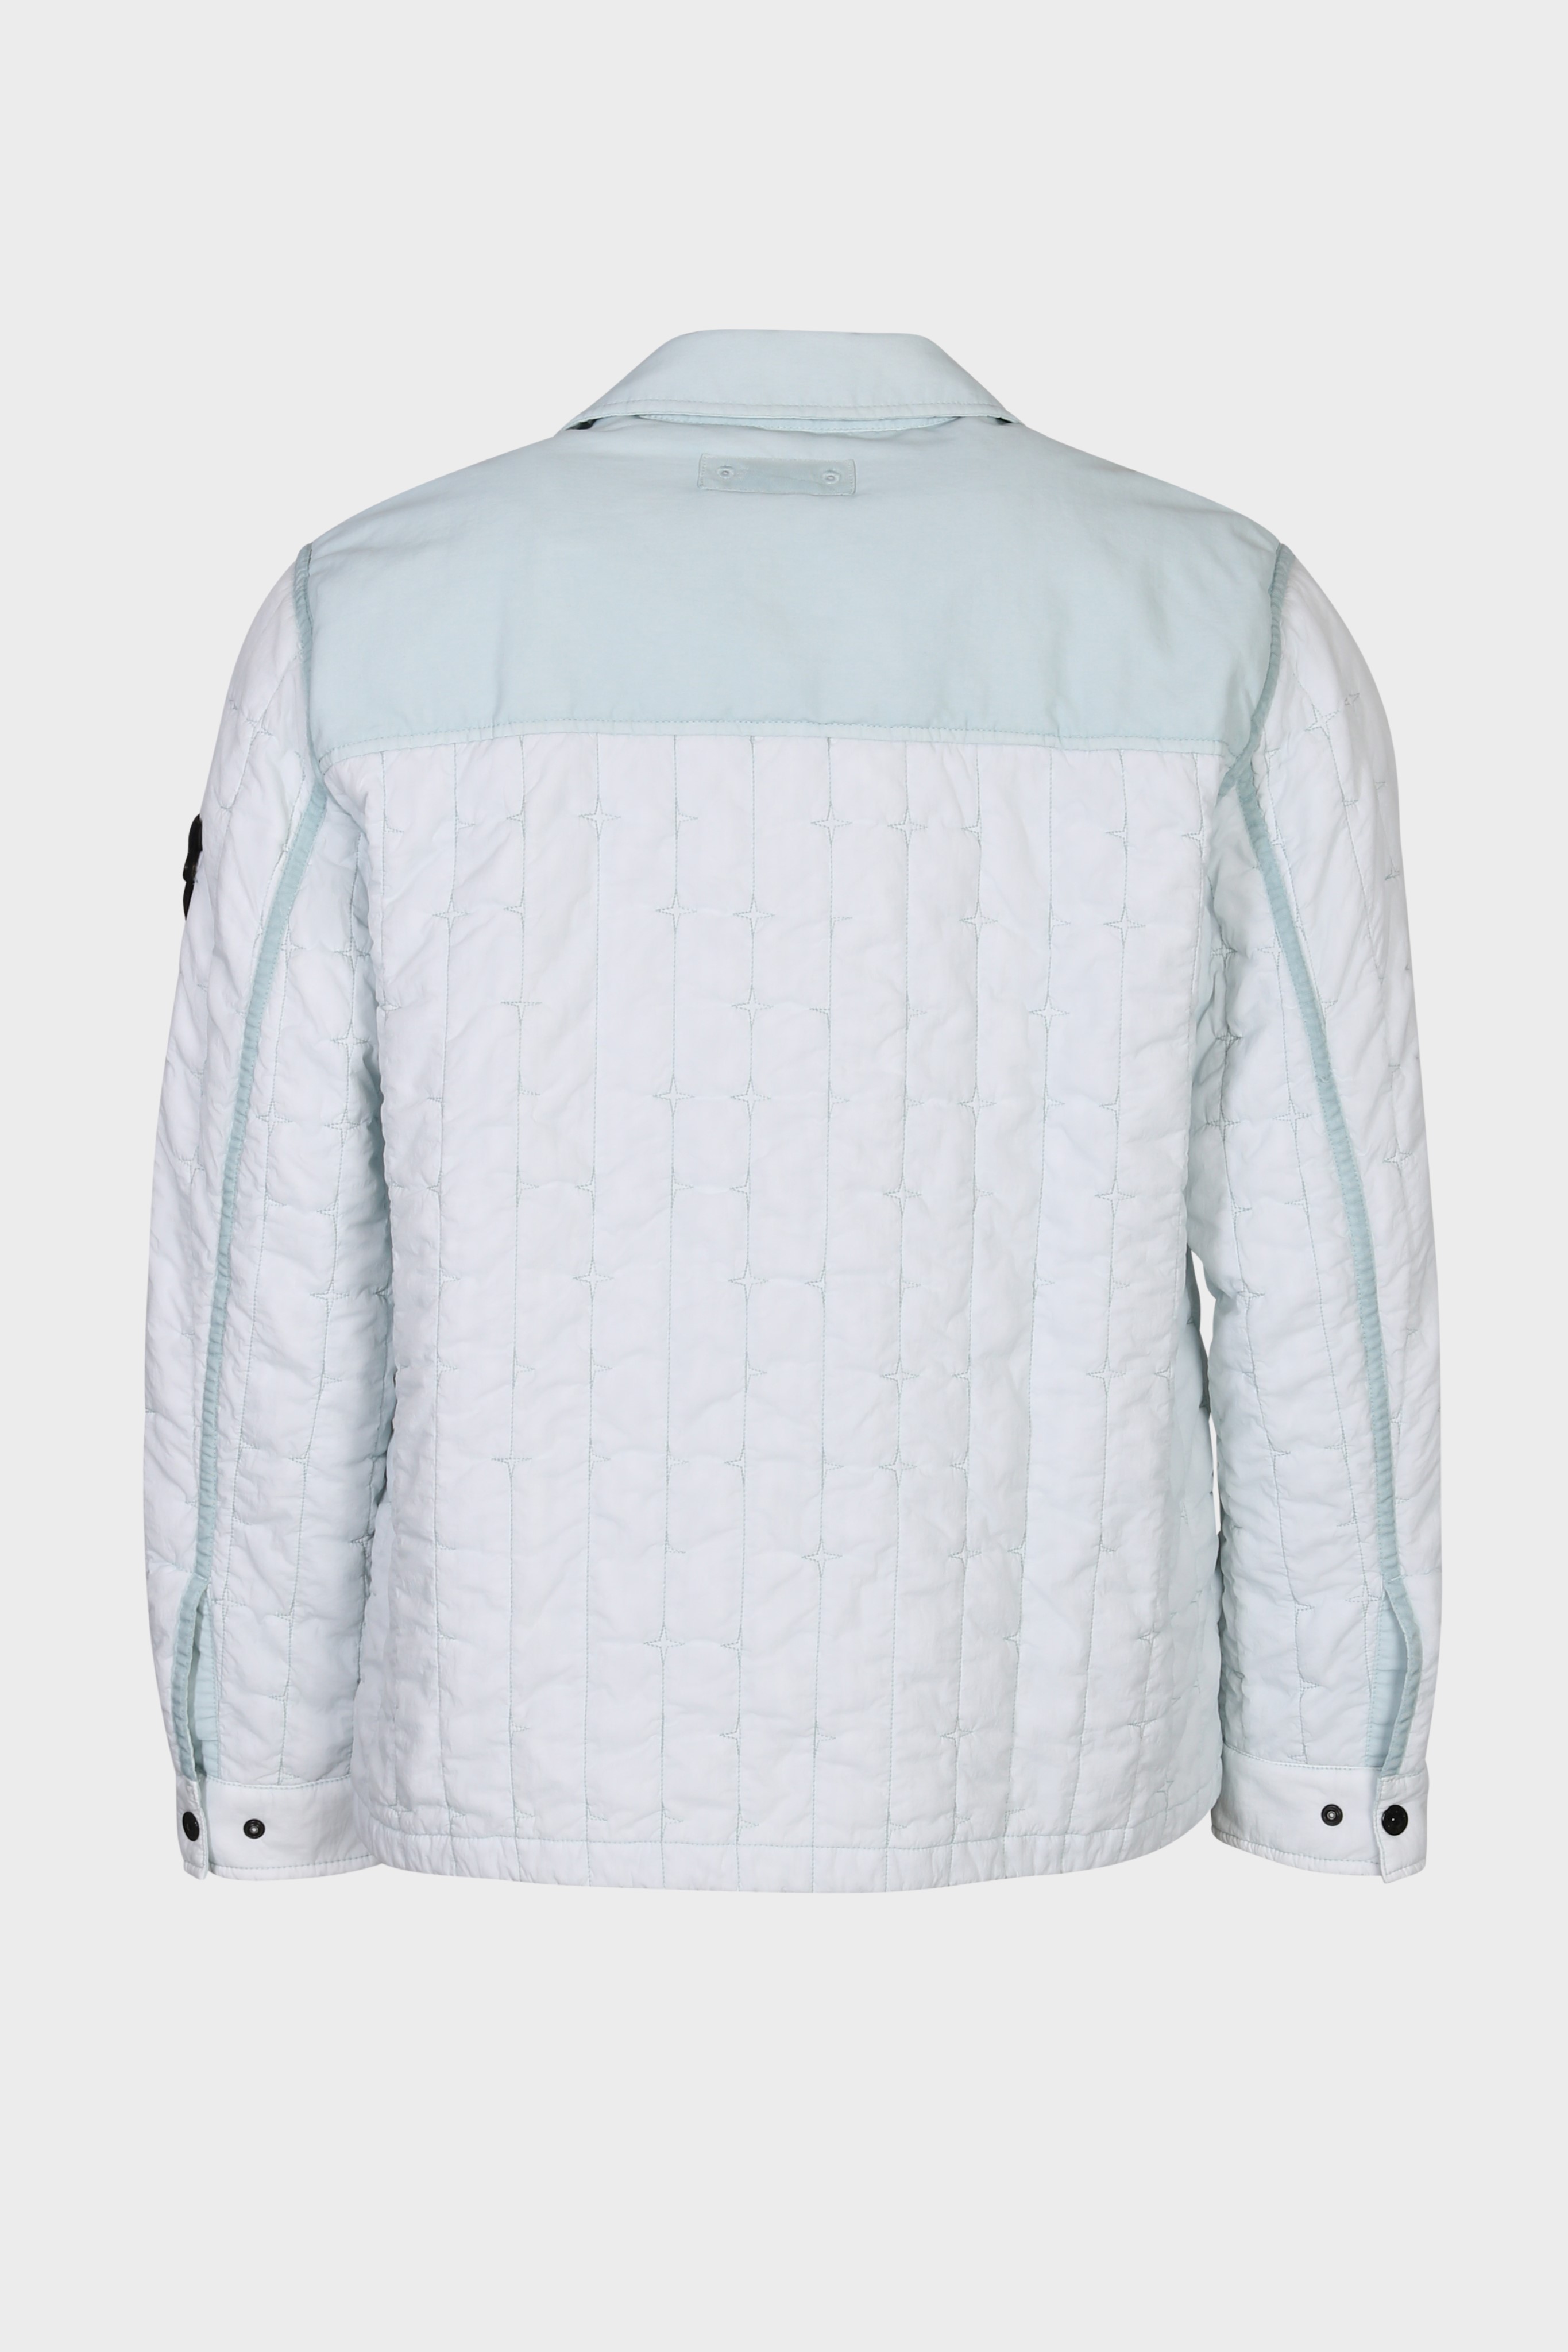 STONE ISLAND Quilted Nylon Stella Jacket in Sky Blue 3XL